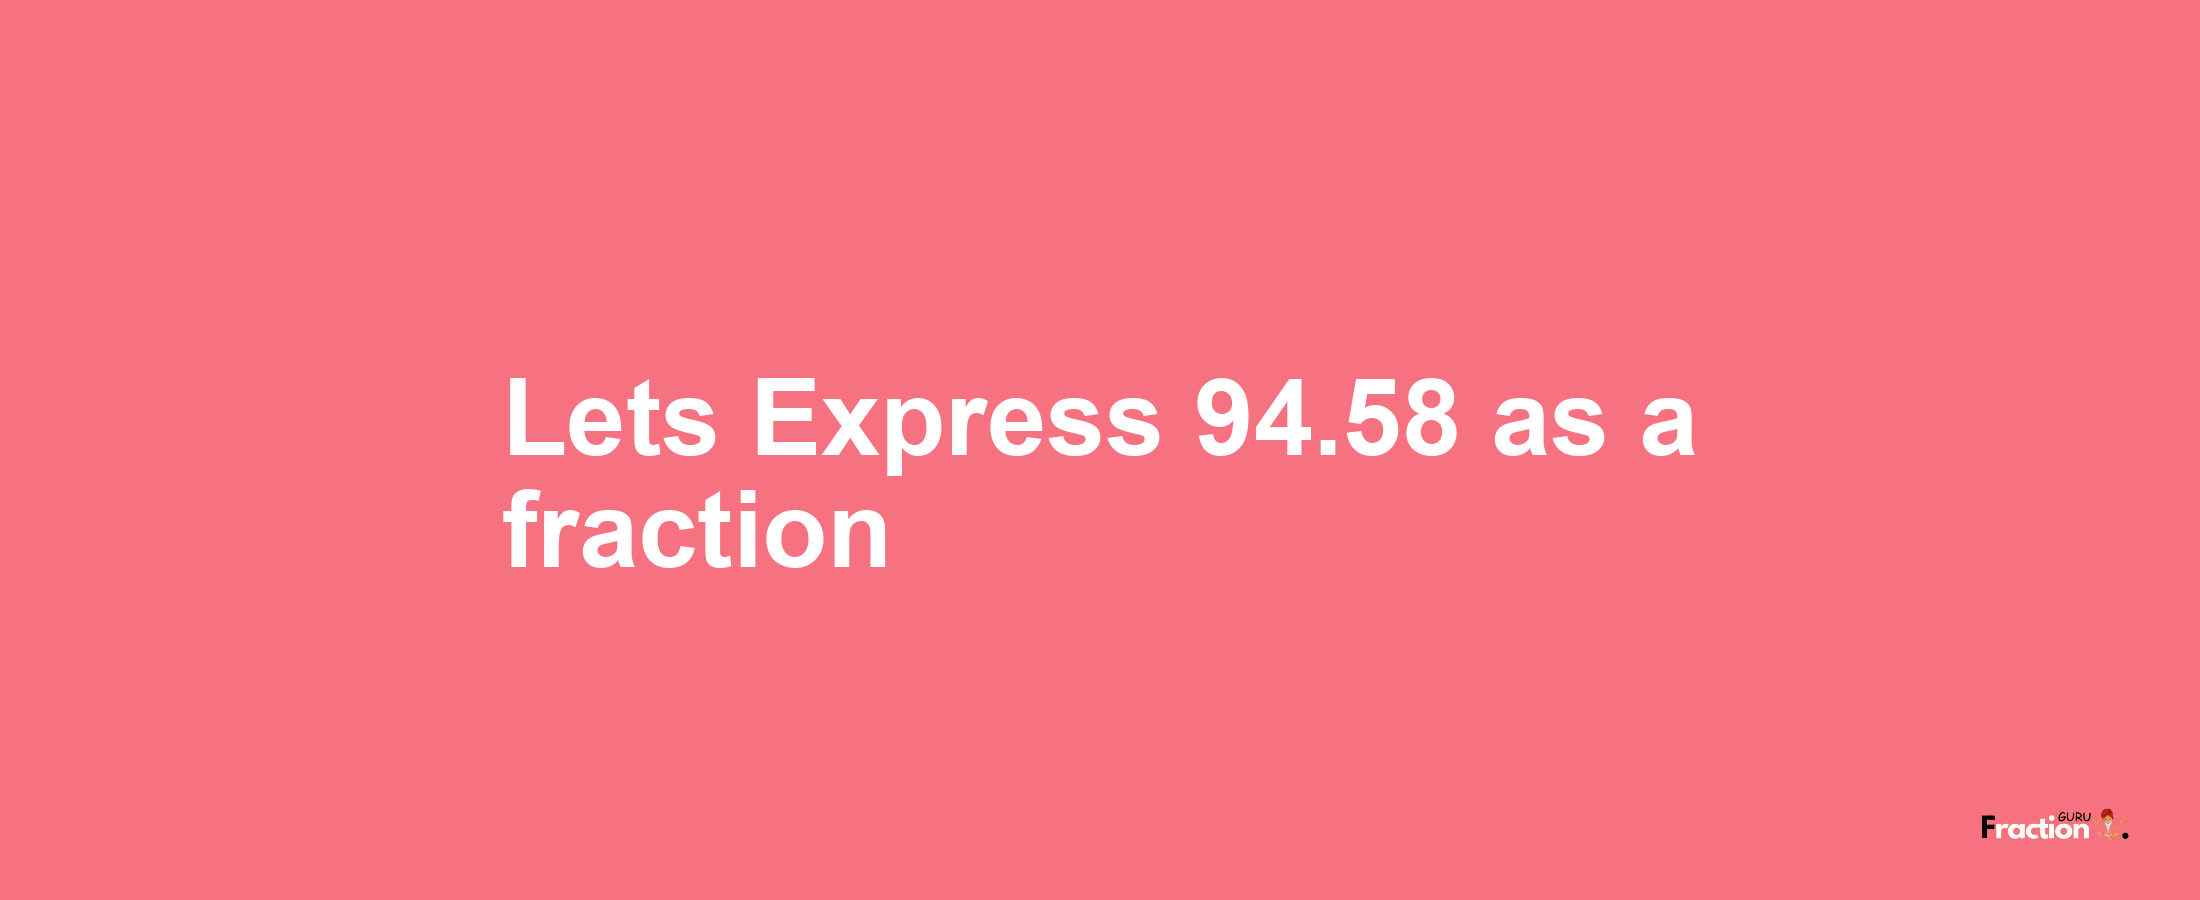 Lets Express 94.58 as afraction